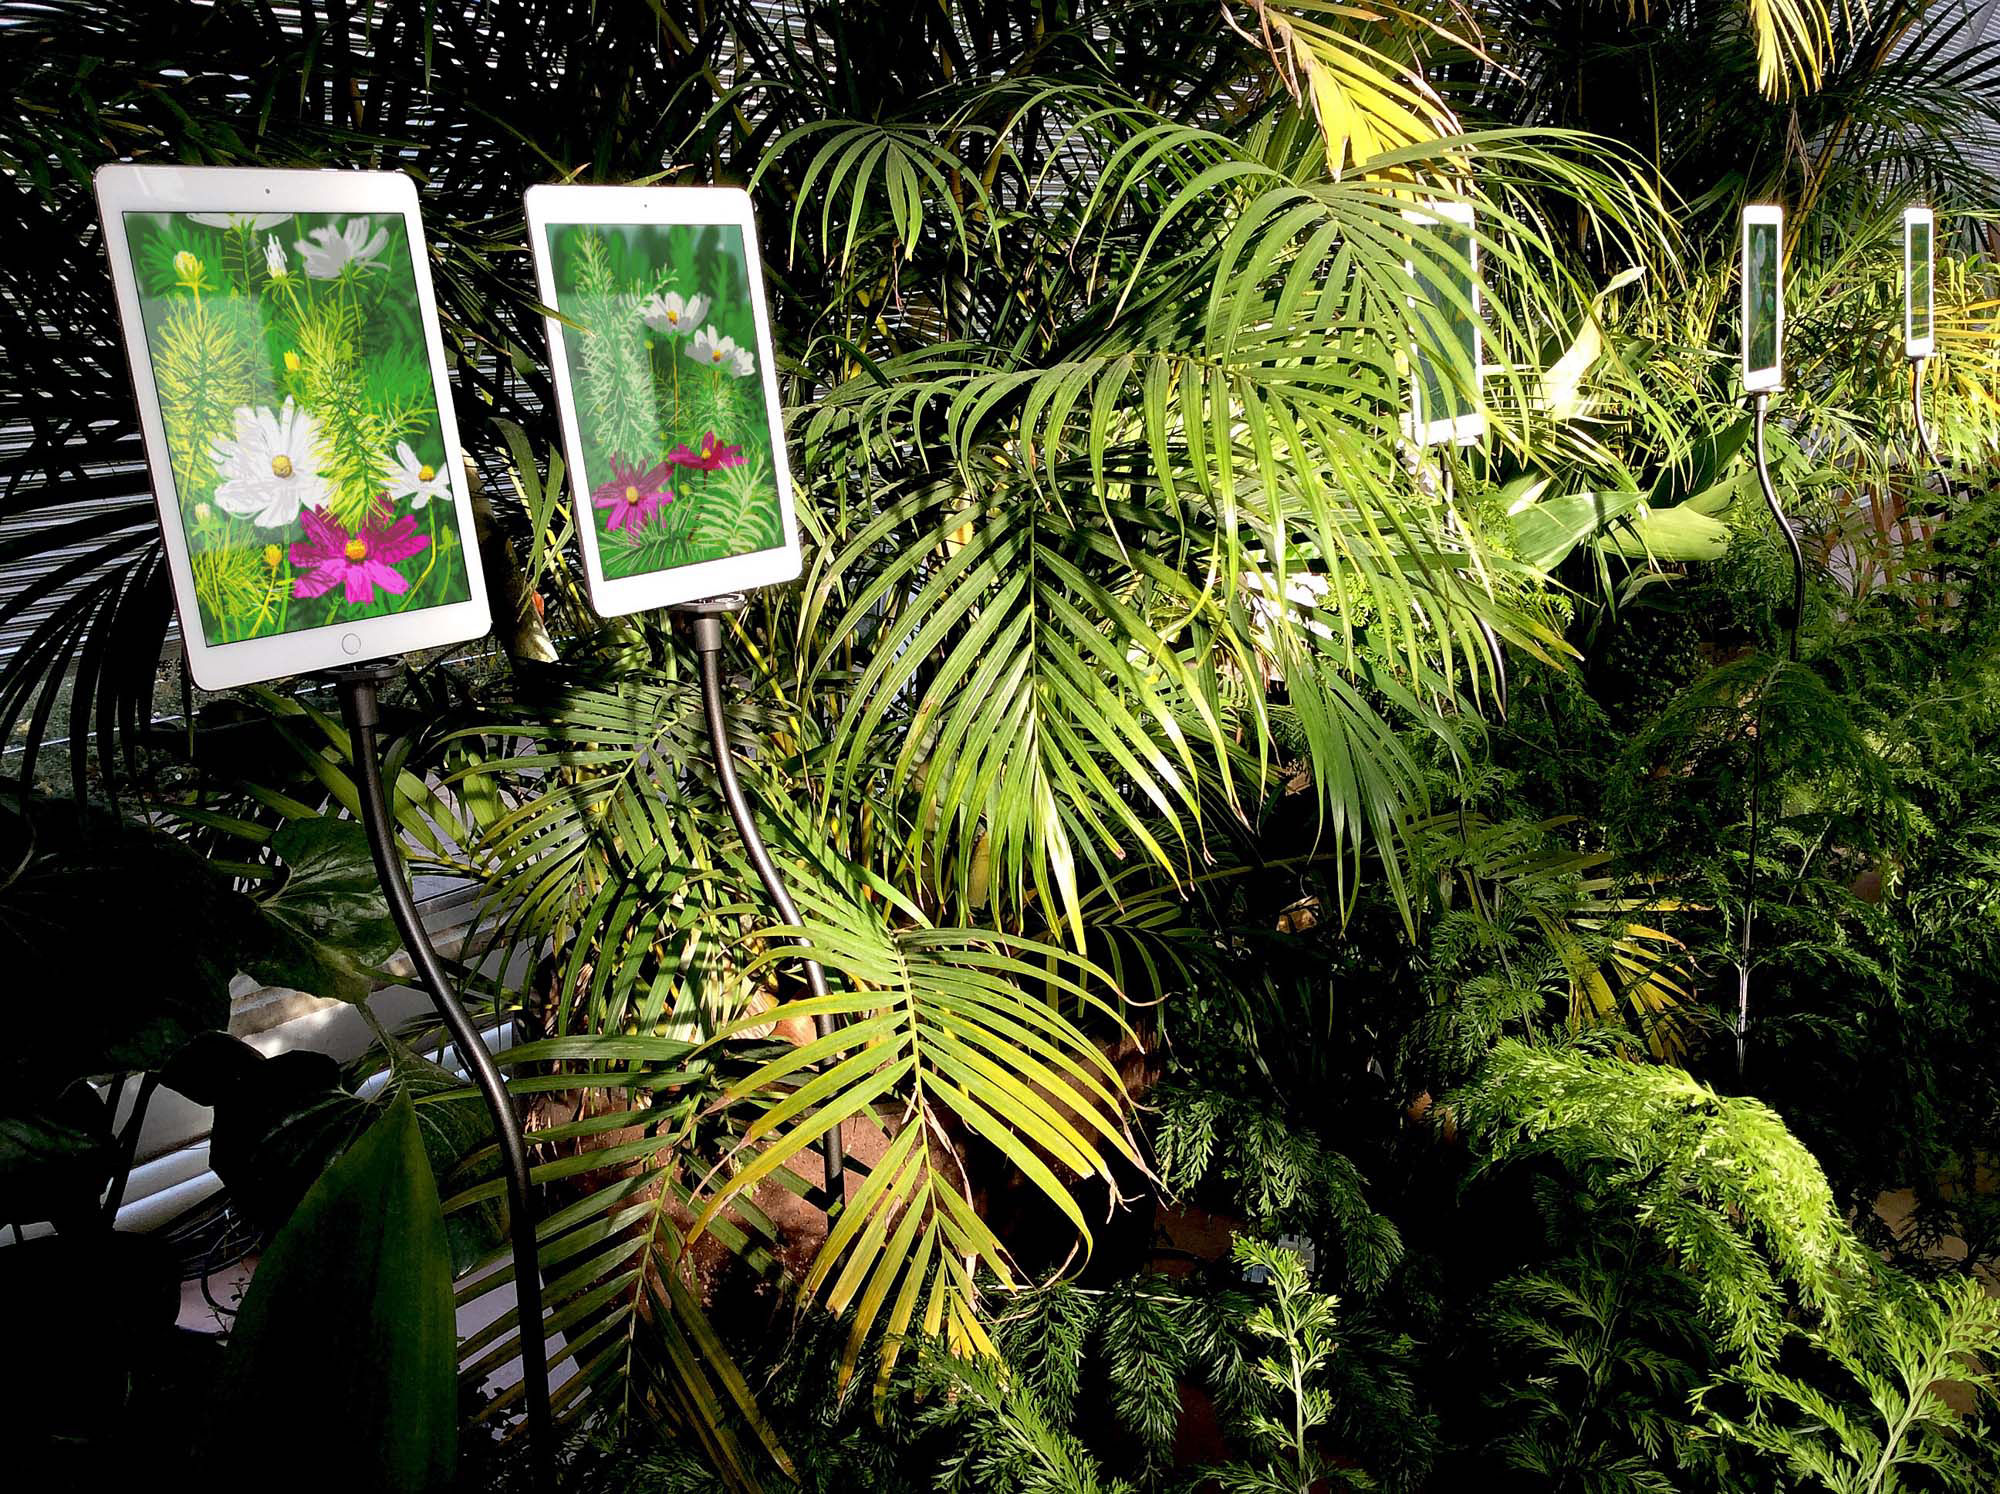 ‘The Digital Garden 2020®, animated iPad drawings at the Royal Horticultural Society Garden Wisley, UK. 1